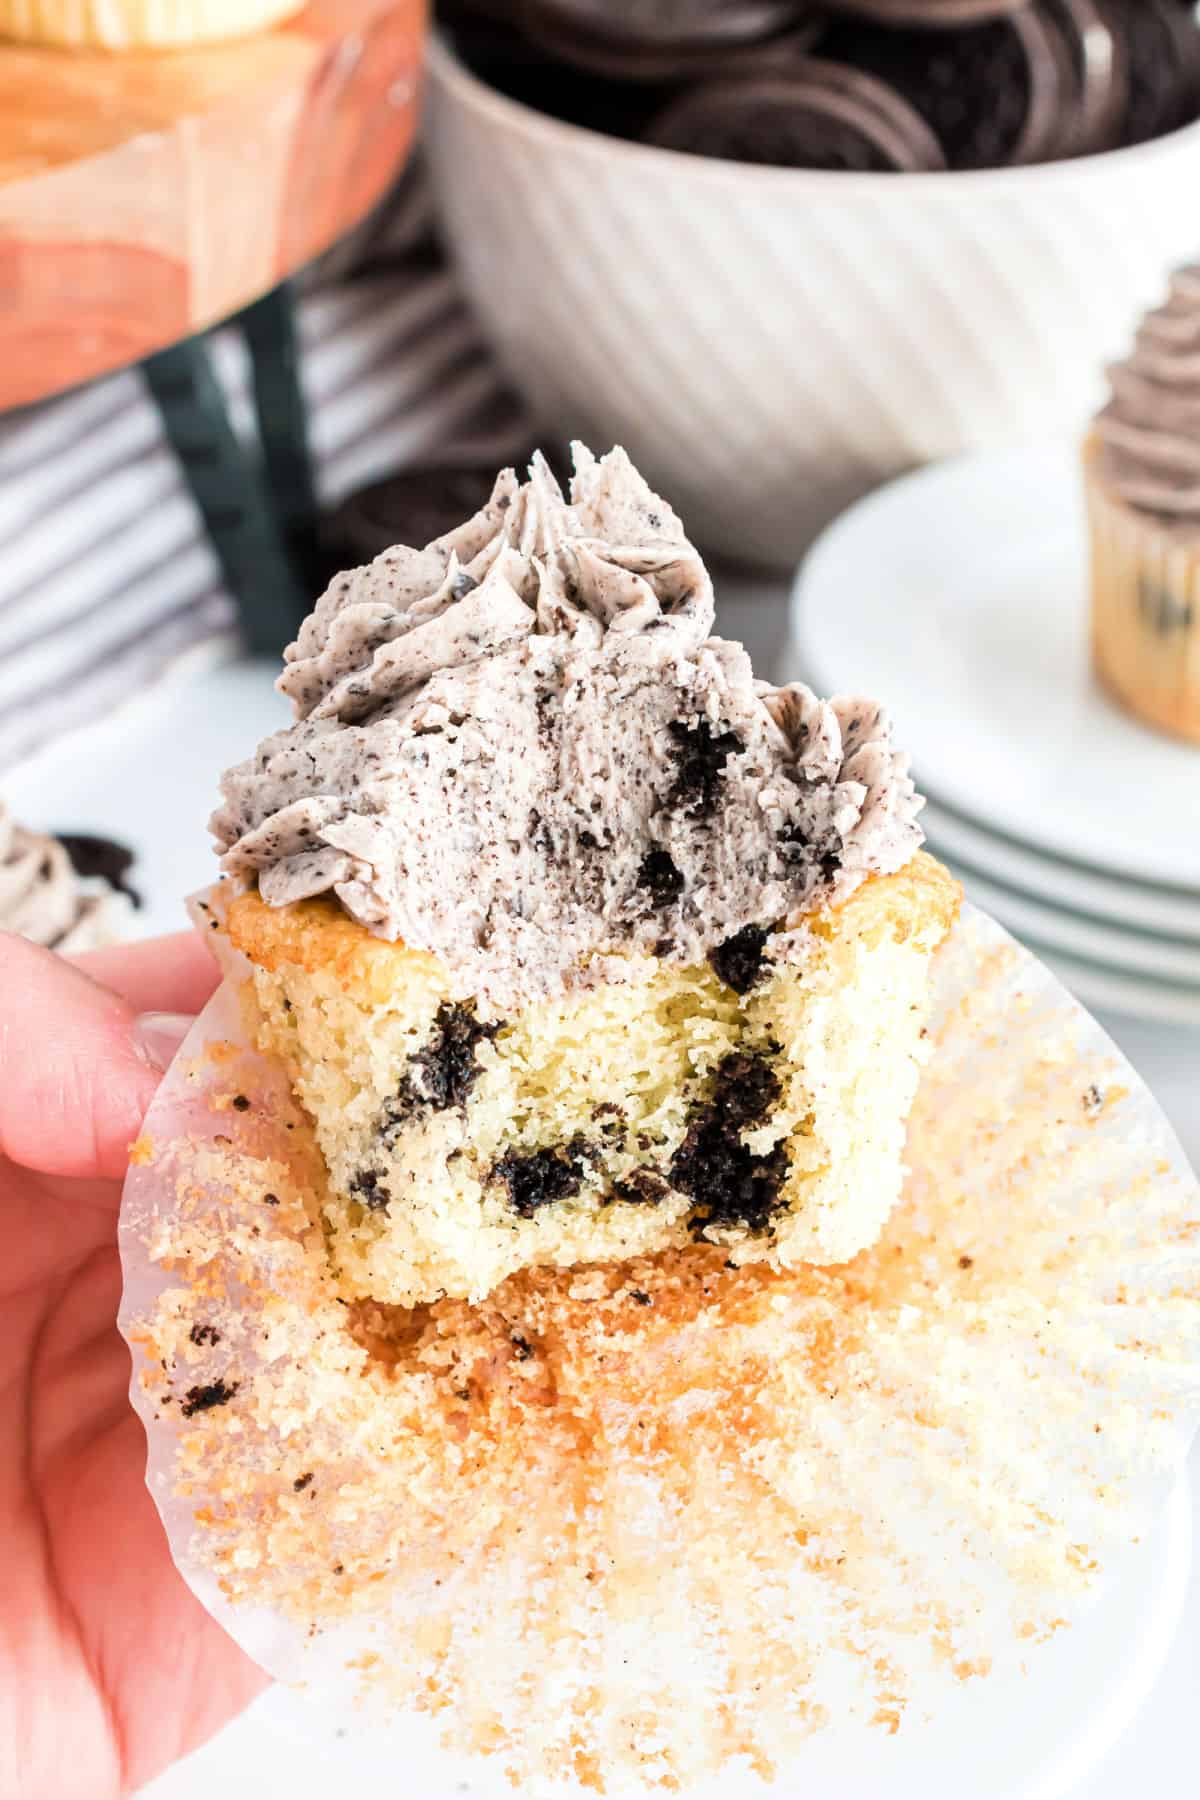 Oreo cupcake with oreo frosting and a bite taken out.